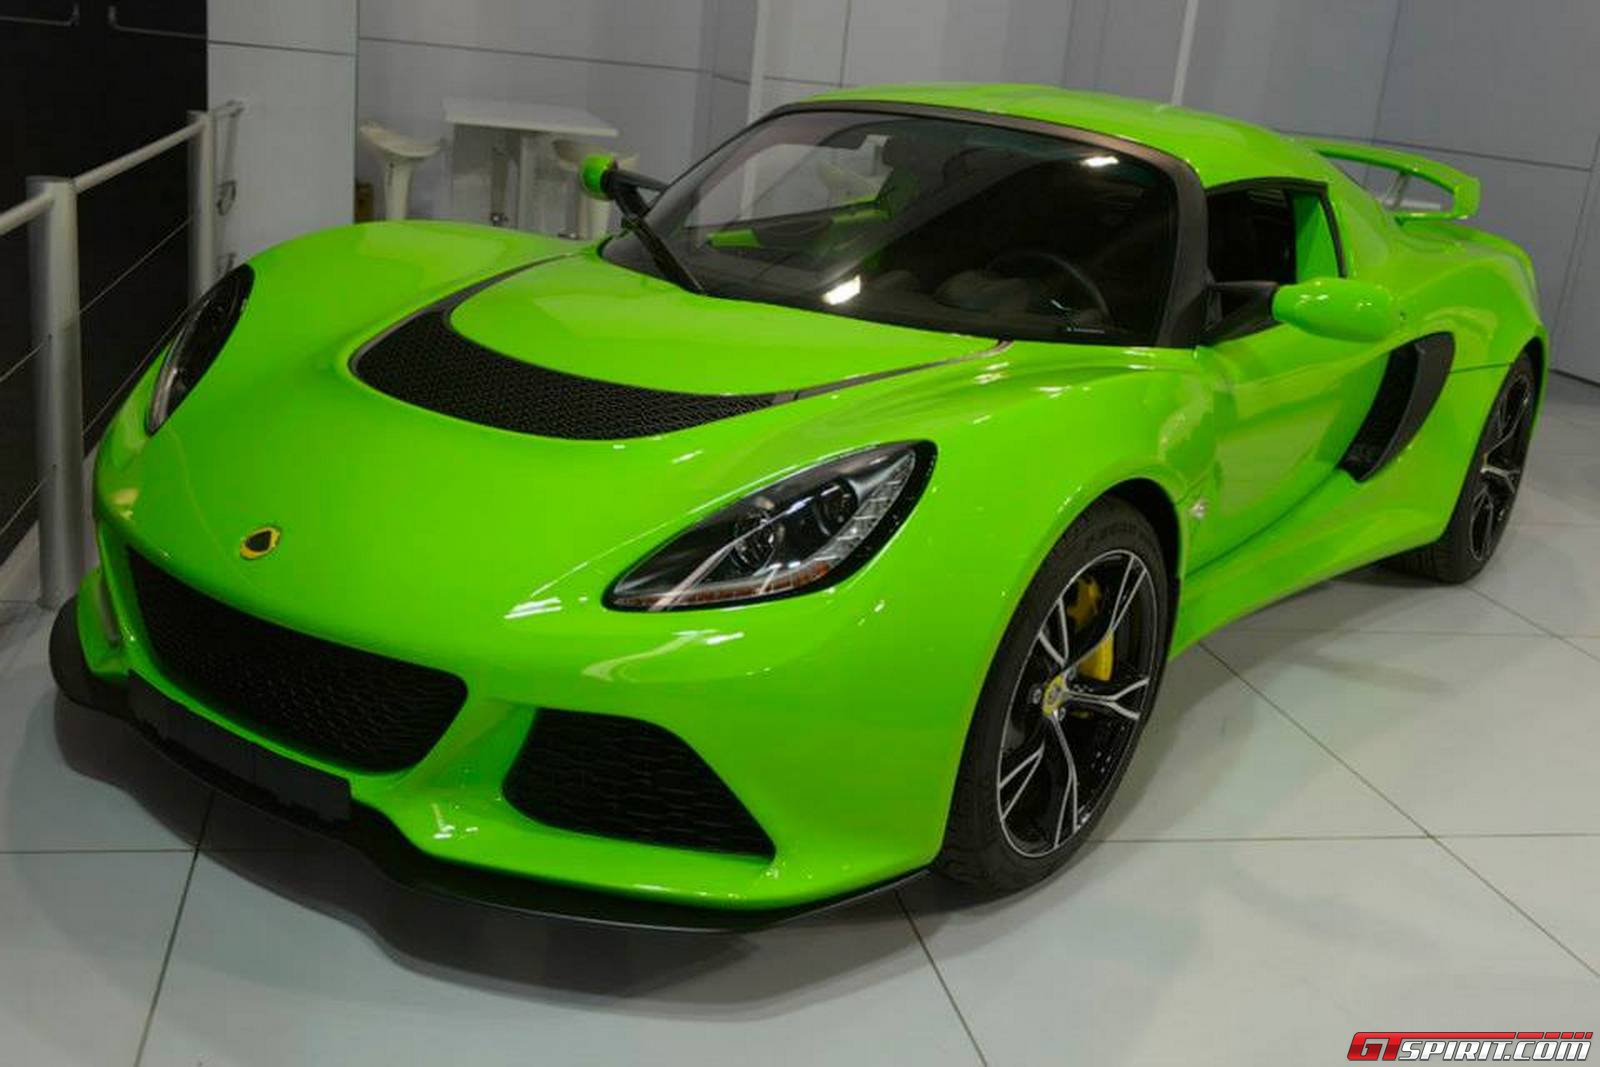 Lotus Cars At The 2014 Brussels Motor Show